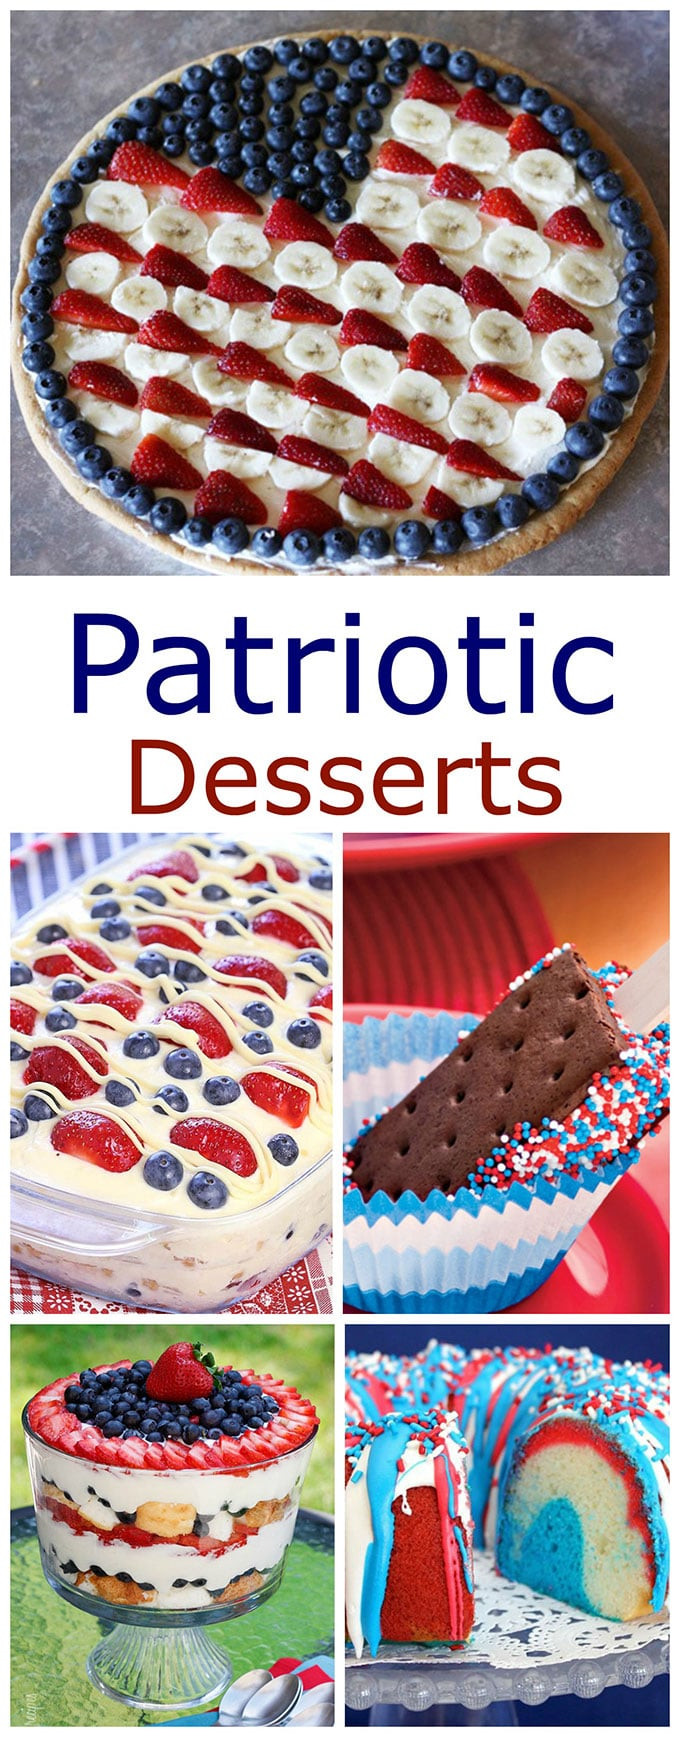 Easy July 4Th Desserts
 Last Minute 4th of July Dessert Ideas House of Hawthornes